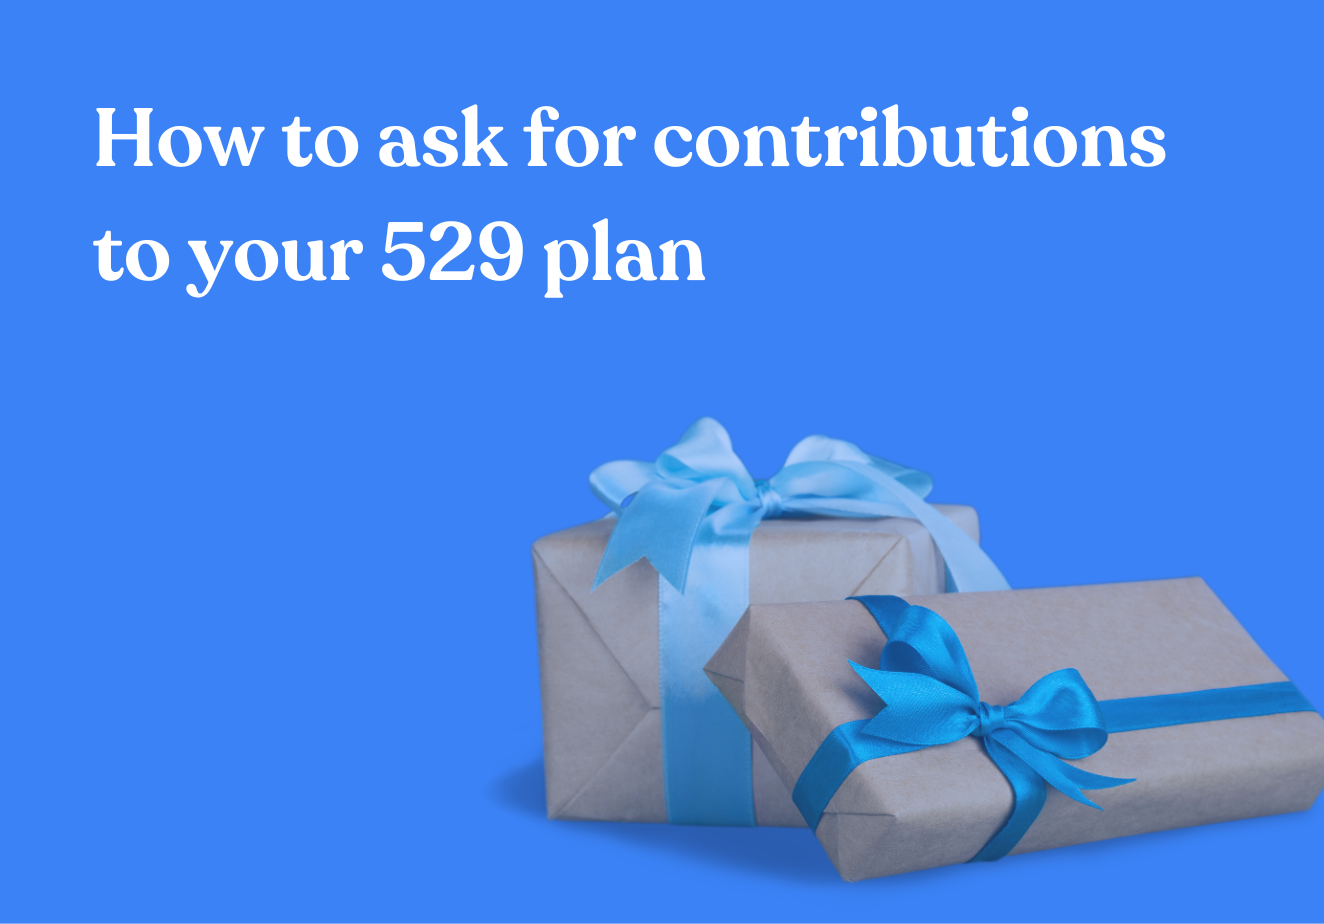 How to ask for contributions to your 529 plan